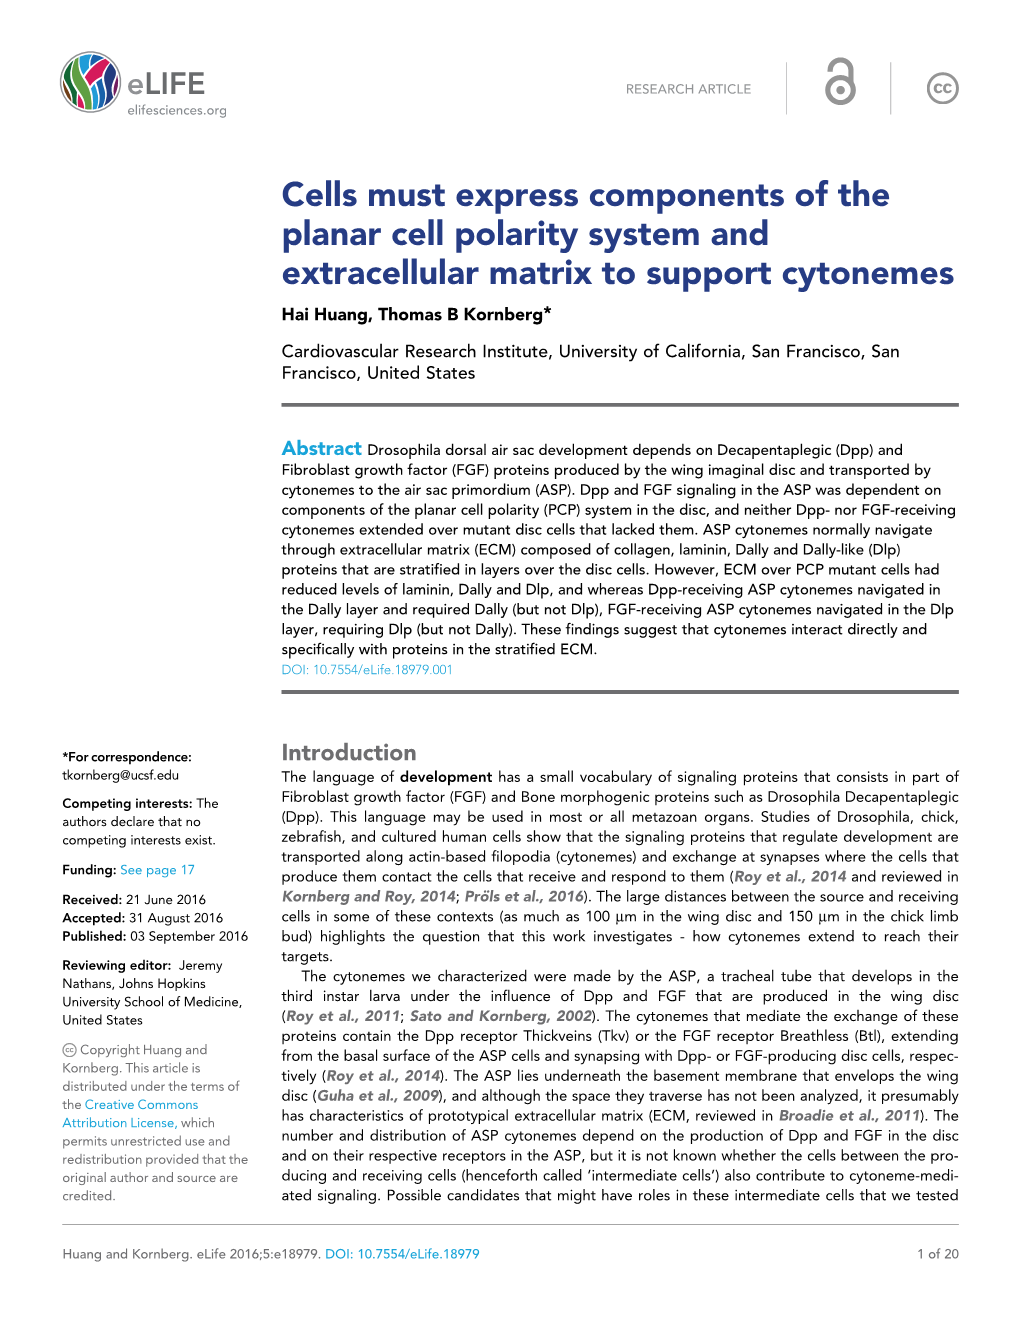 Cells Must Express Components of the Planar Cell Polarity System and Extracellular Matrix to Support Cytonemes Hai Huang, Thomas B Kornberg*